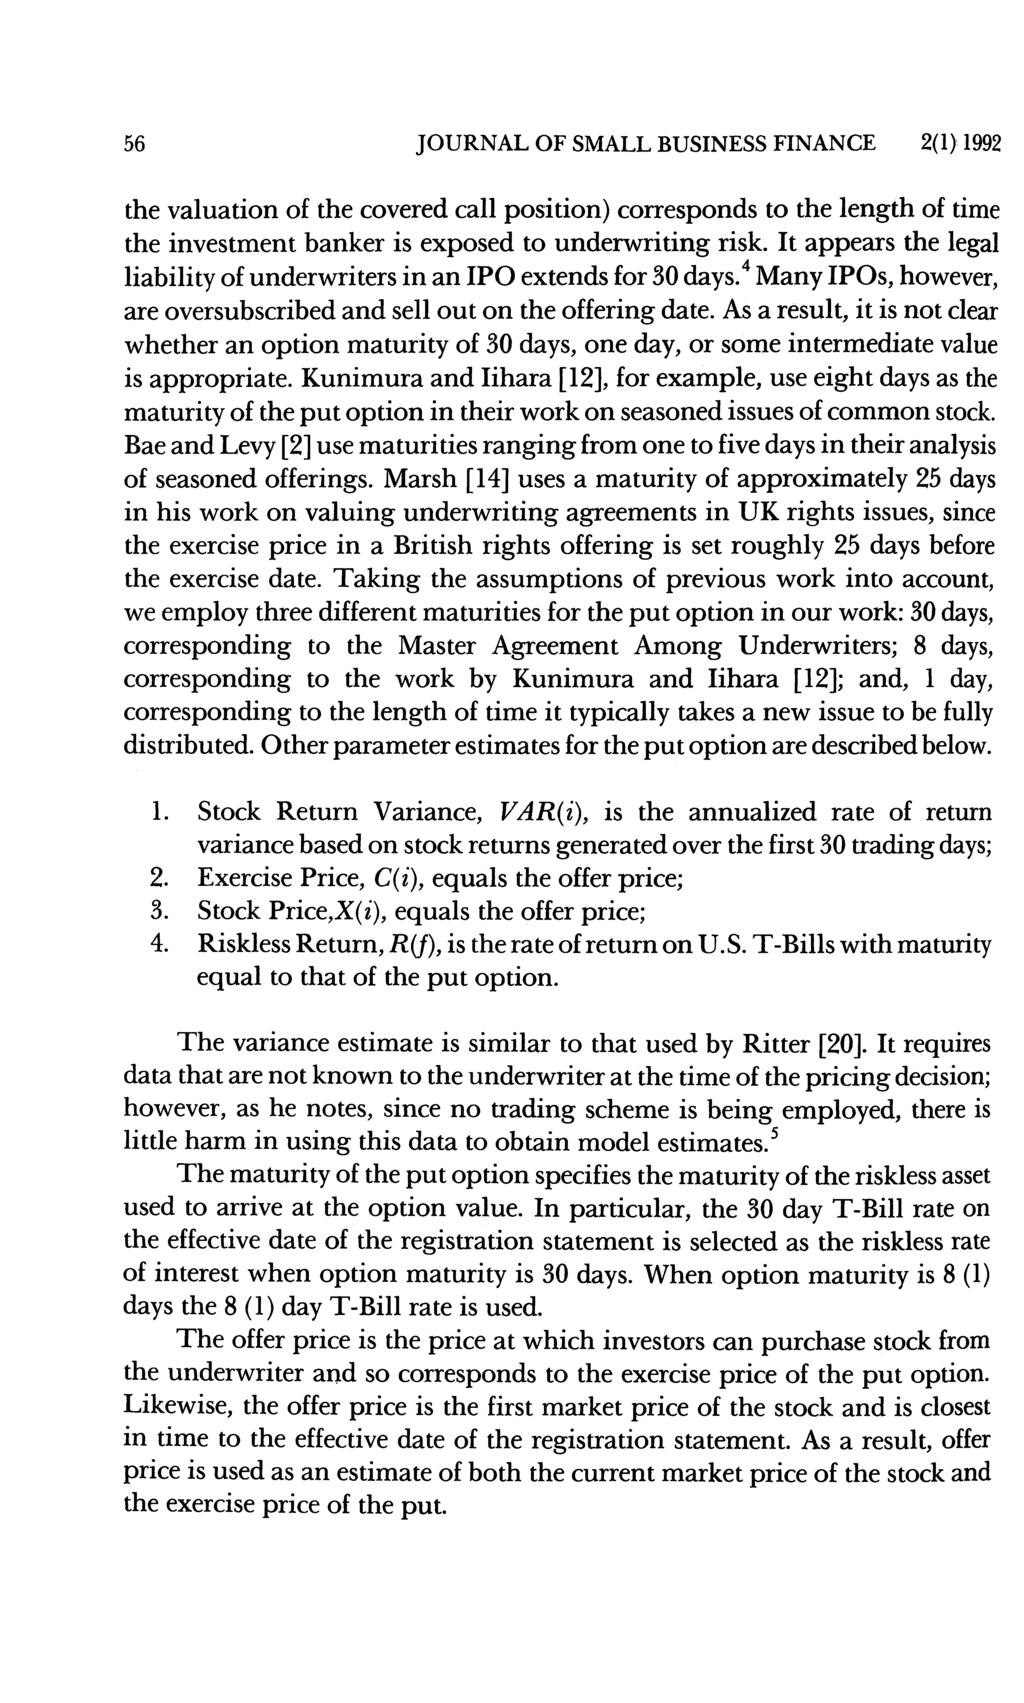 56 JOURNAL OF SMALL BUSINESS FINANCE 2(1) 1992 the valuation of the covered call position) corresponds to the length of time the investment banker is exposed to underwriting risk.